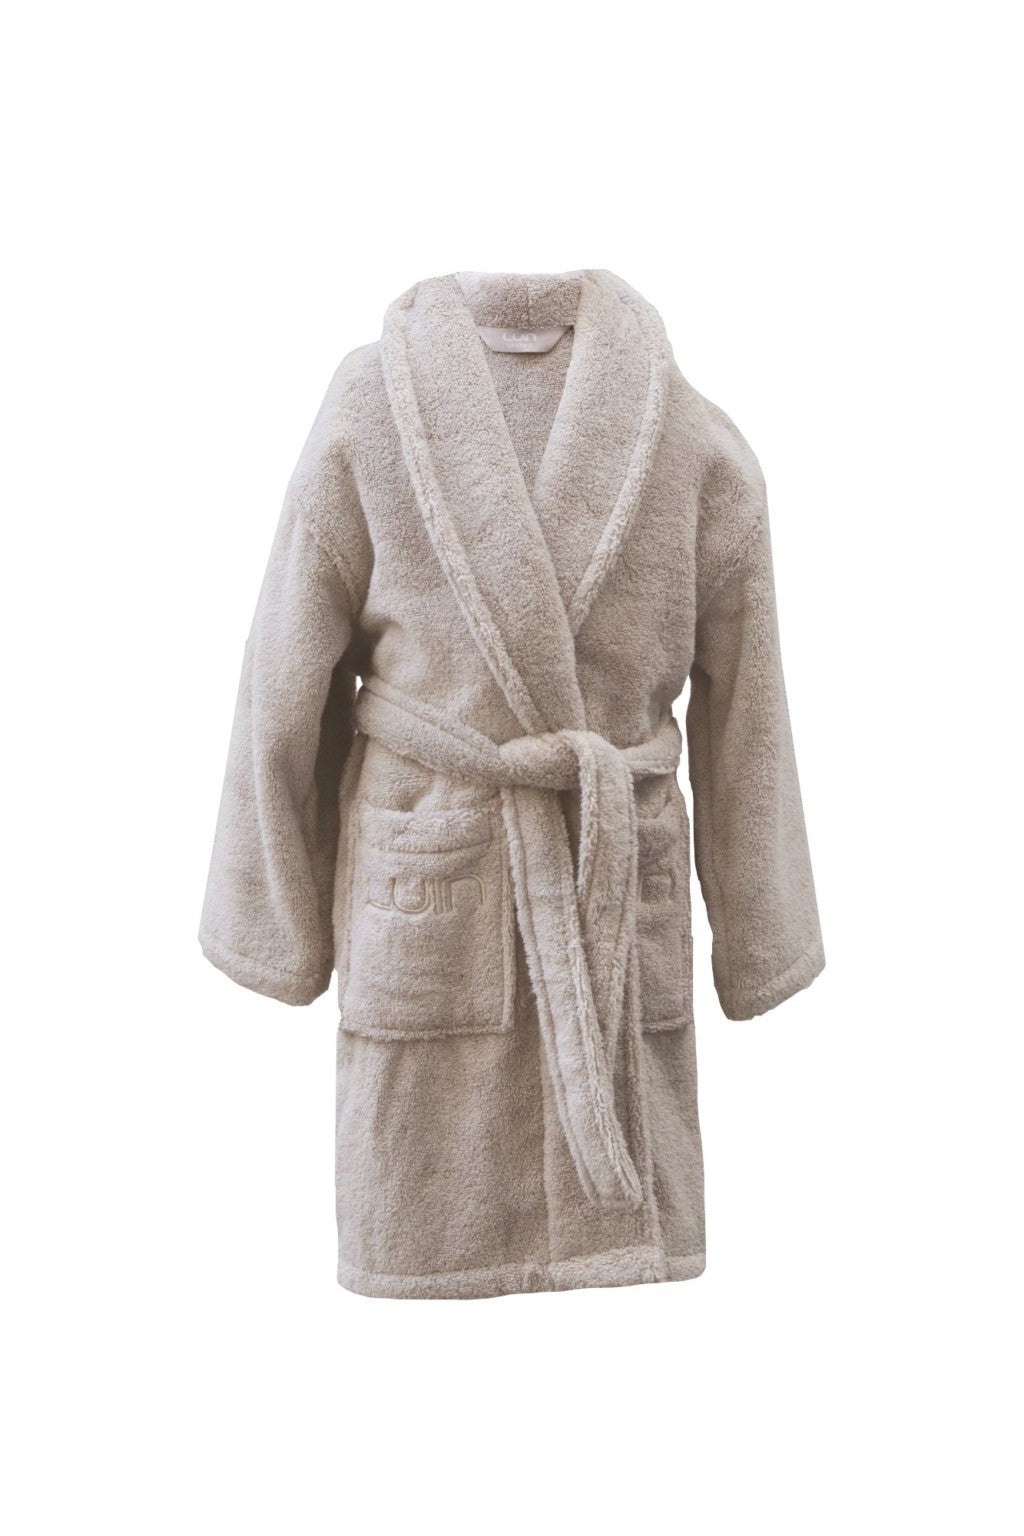 Luin Living Bathrobe for the Whole Family, 8 different sizes, Sand